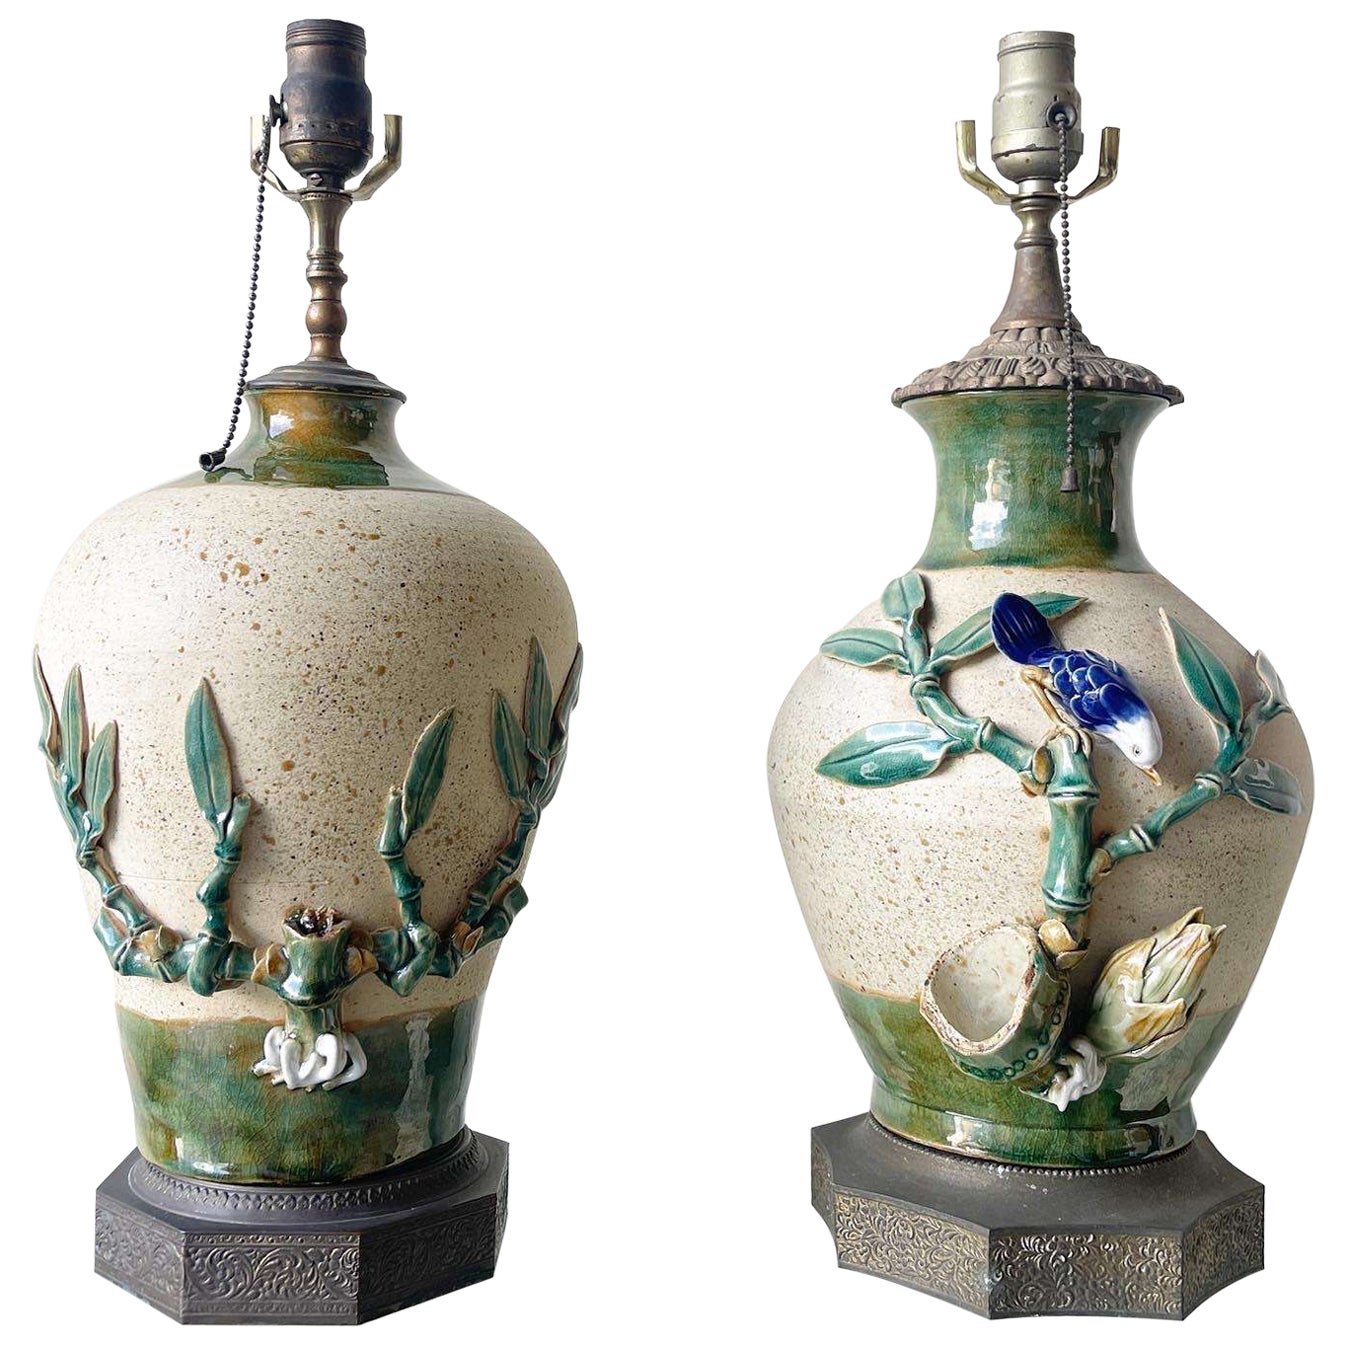 Vintage Ceramic Hand Painted and Sculpted Table Lamps With Brass Bases - a Pair For Sale